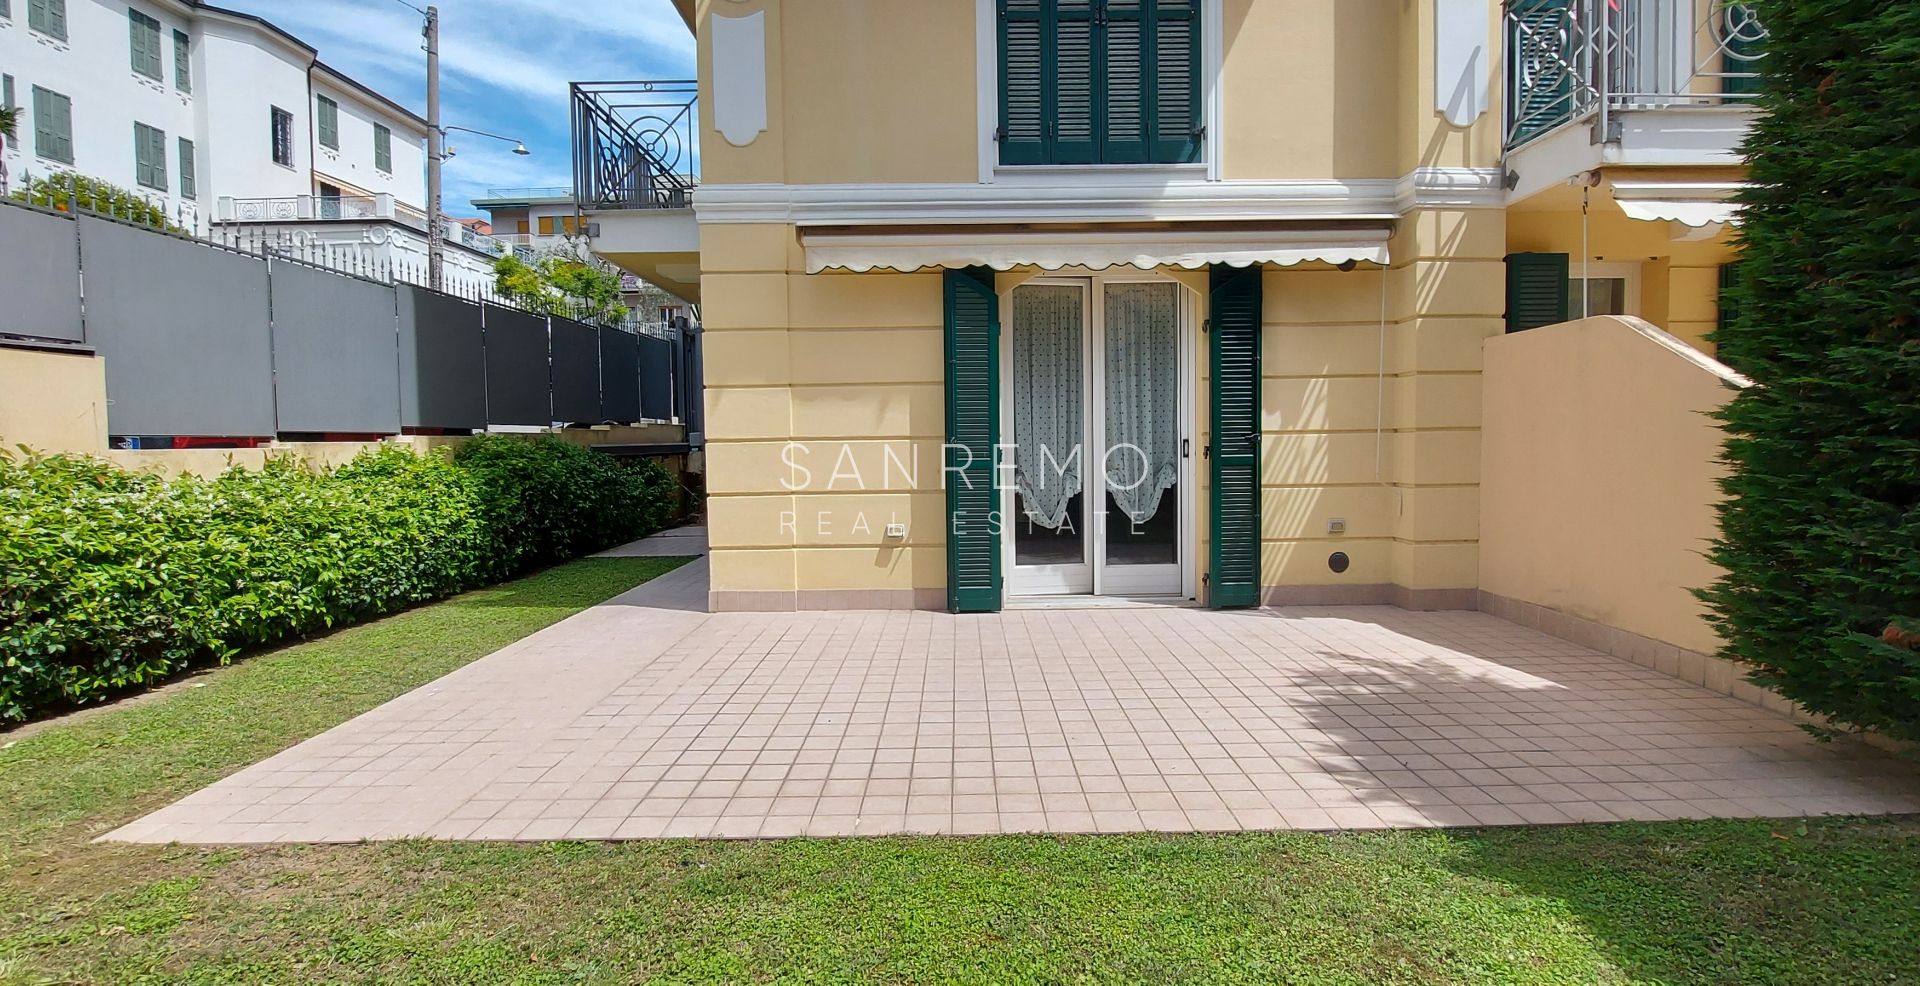 Nice apartment with garden in the centre of Bordighera